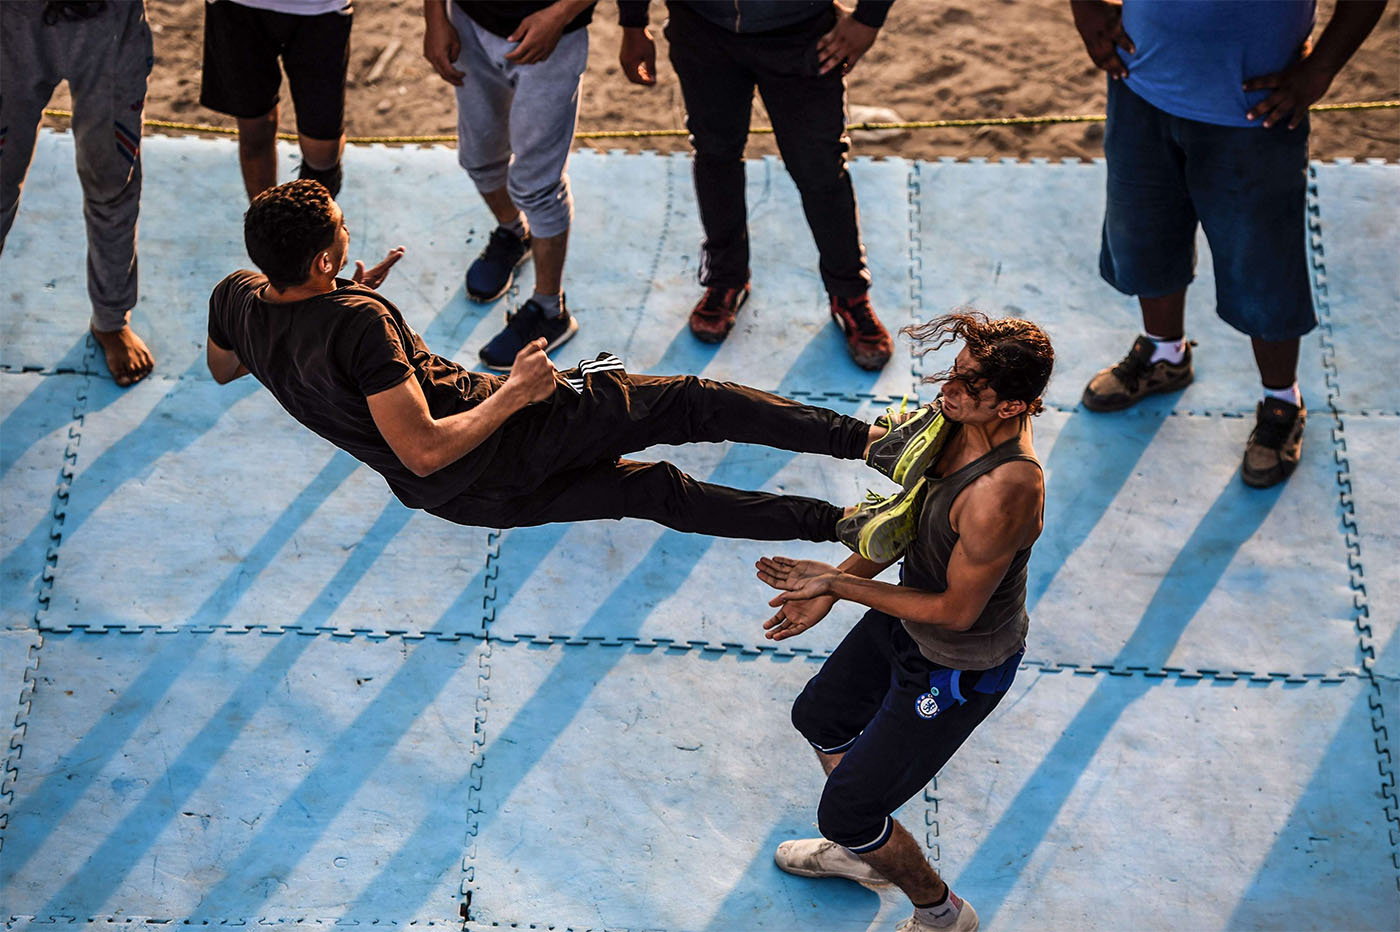 Members of the self-declared Egyptian Wrestling Federation (EWR) train in a ring during a session in the village of Serapeum